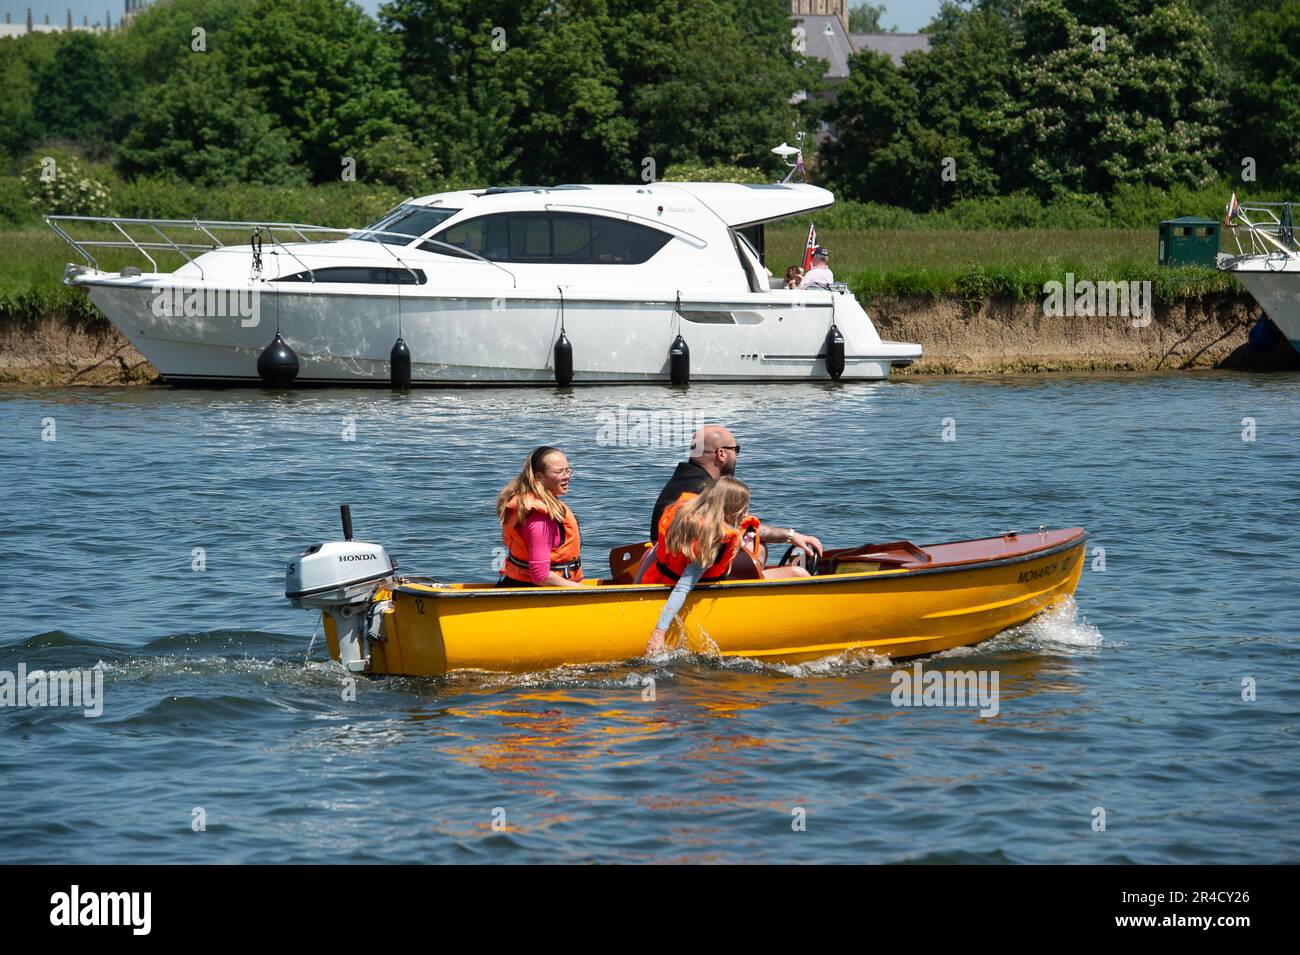 Windsor, Berkshire, UK. 27th May, 23. People were enjoying hiring boats and taking them for a trip along the River Thames in Windsor today on a warm and sunny bank holiday Saturday. Credit: Maureen McLean/Alamy Live News Stock Photo